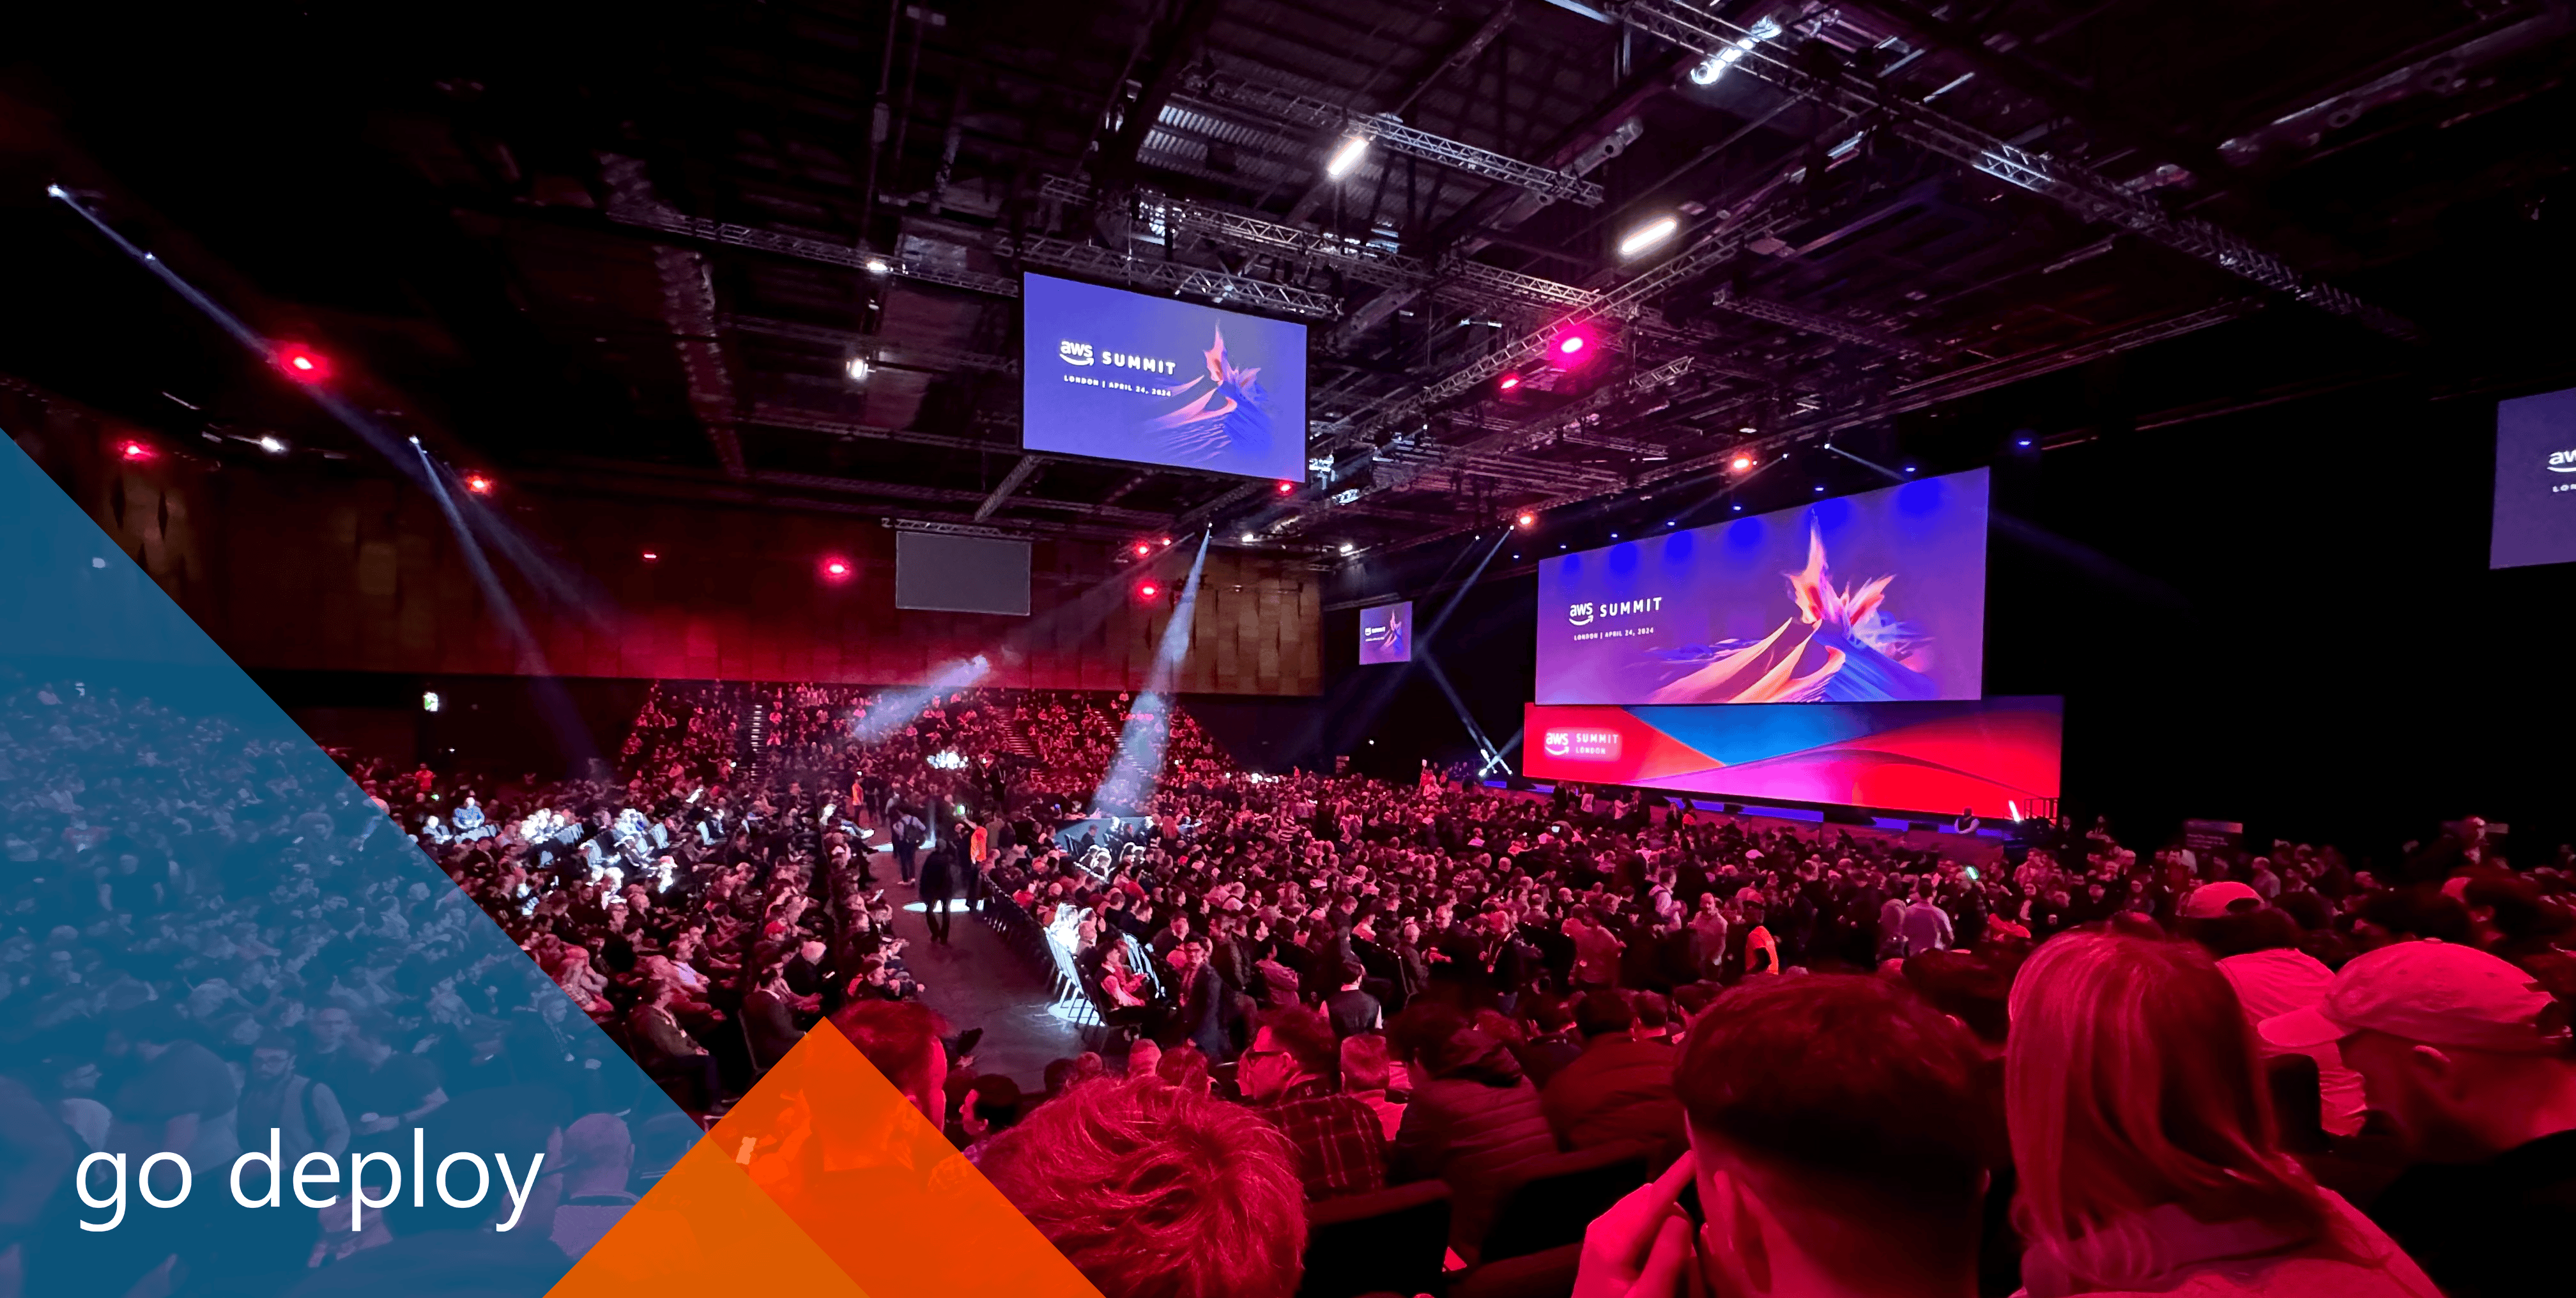 Image of the audience and stage at the AWS Summit Keynote in London.